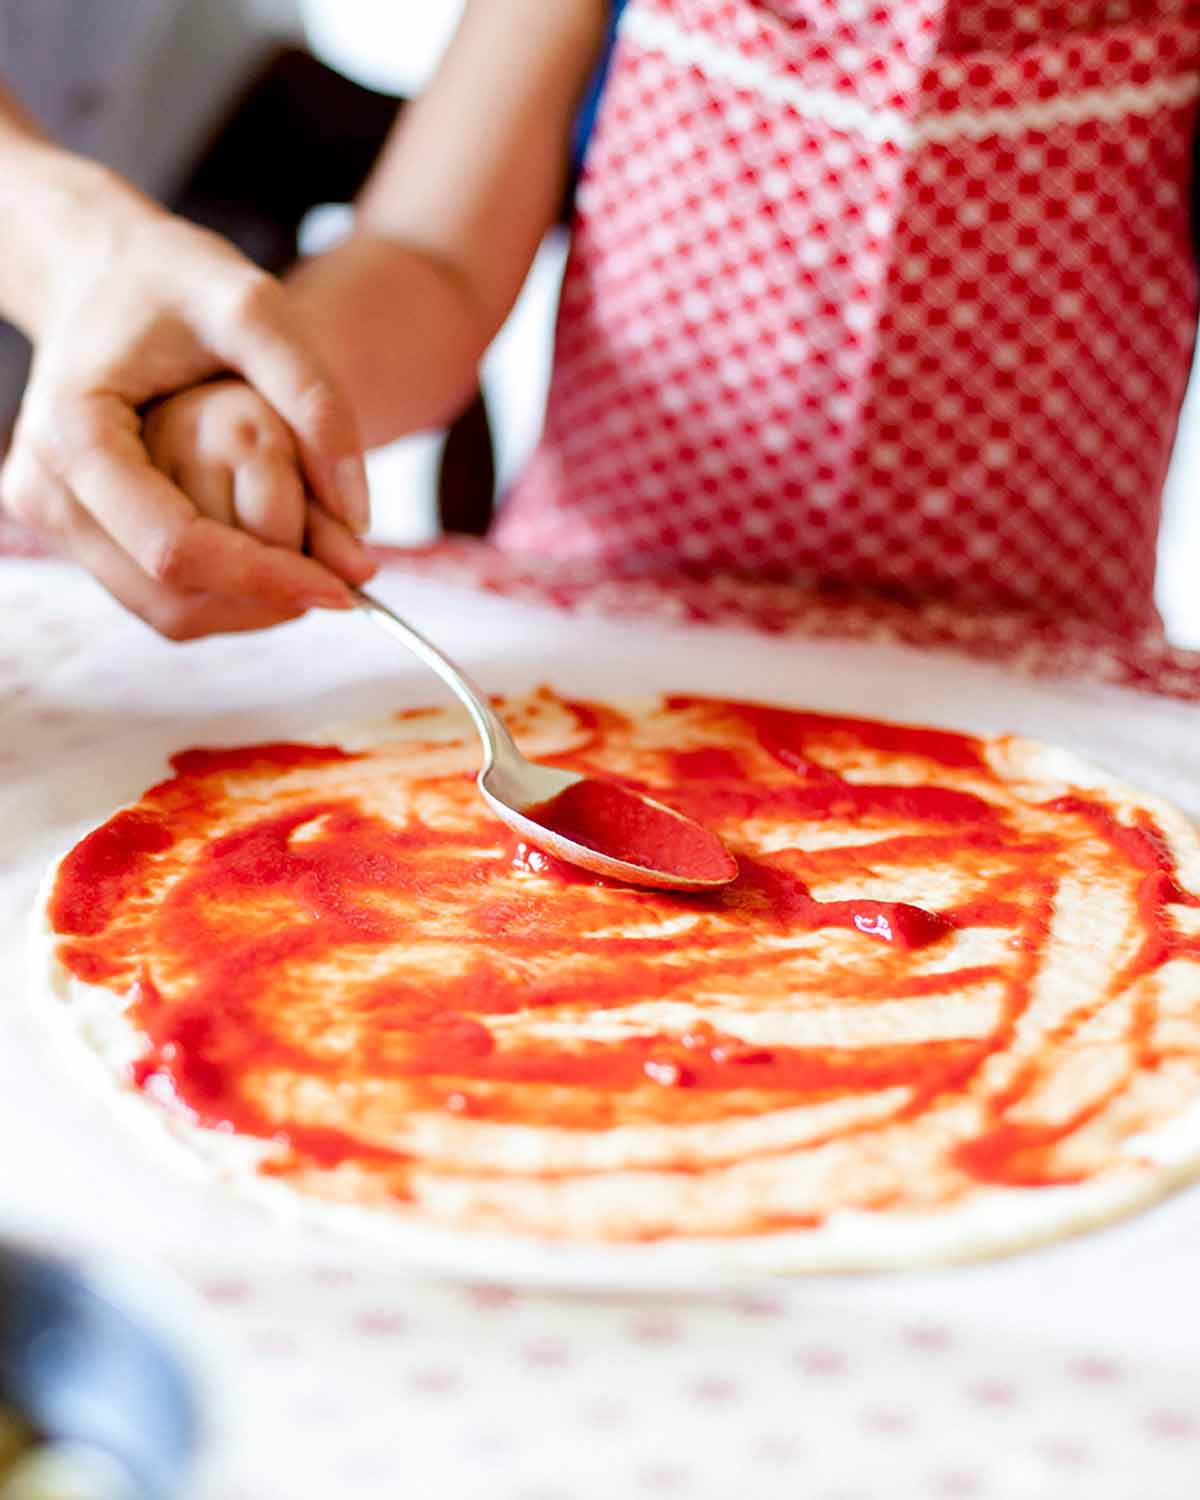 A person helping a child spread tomato sauce on a homemade pizza.